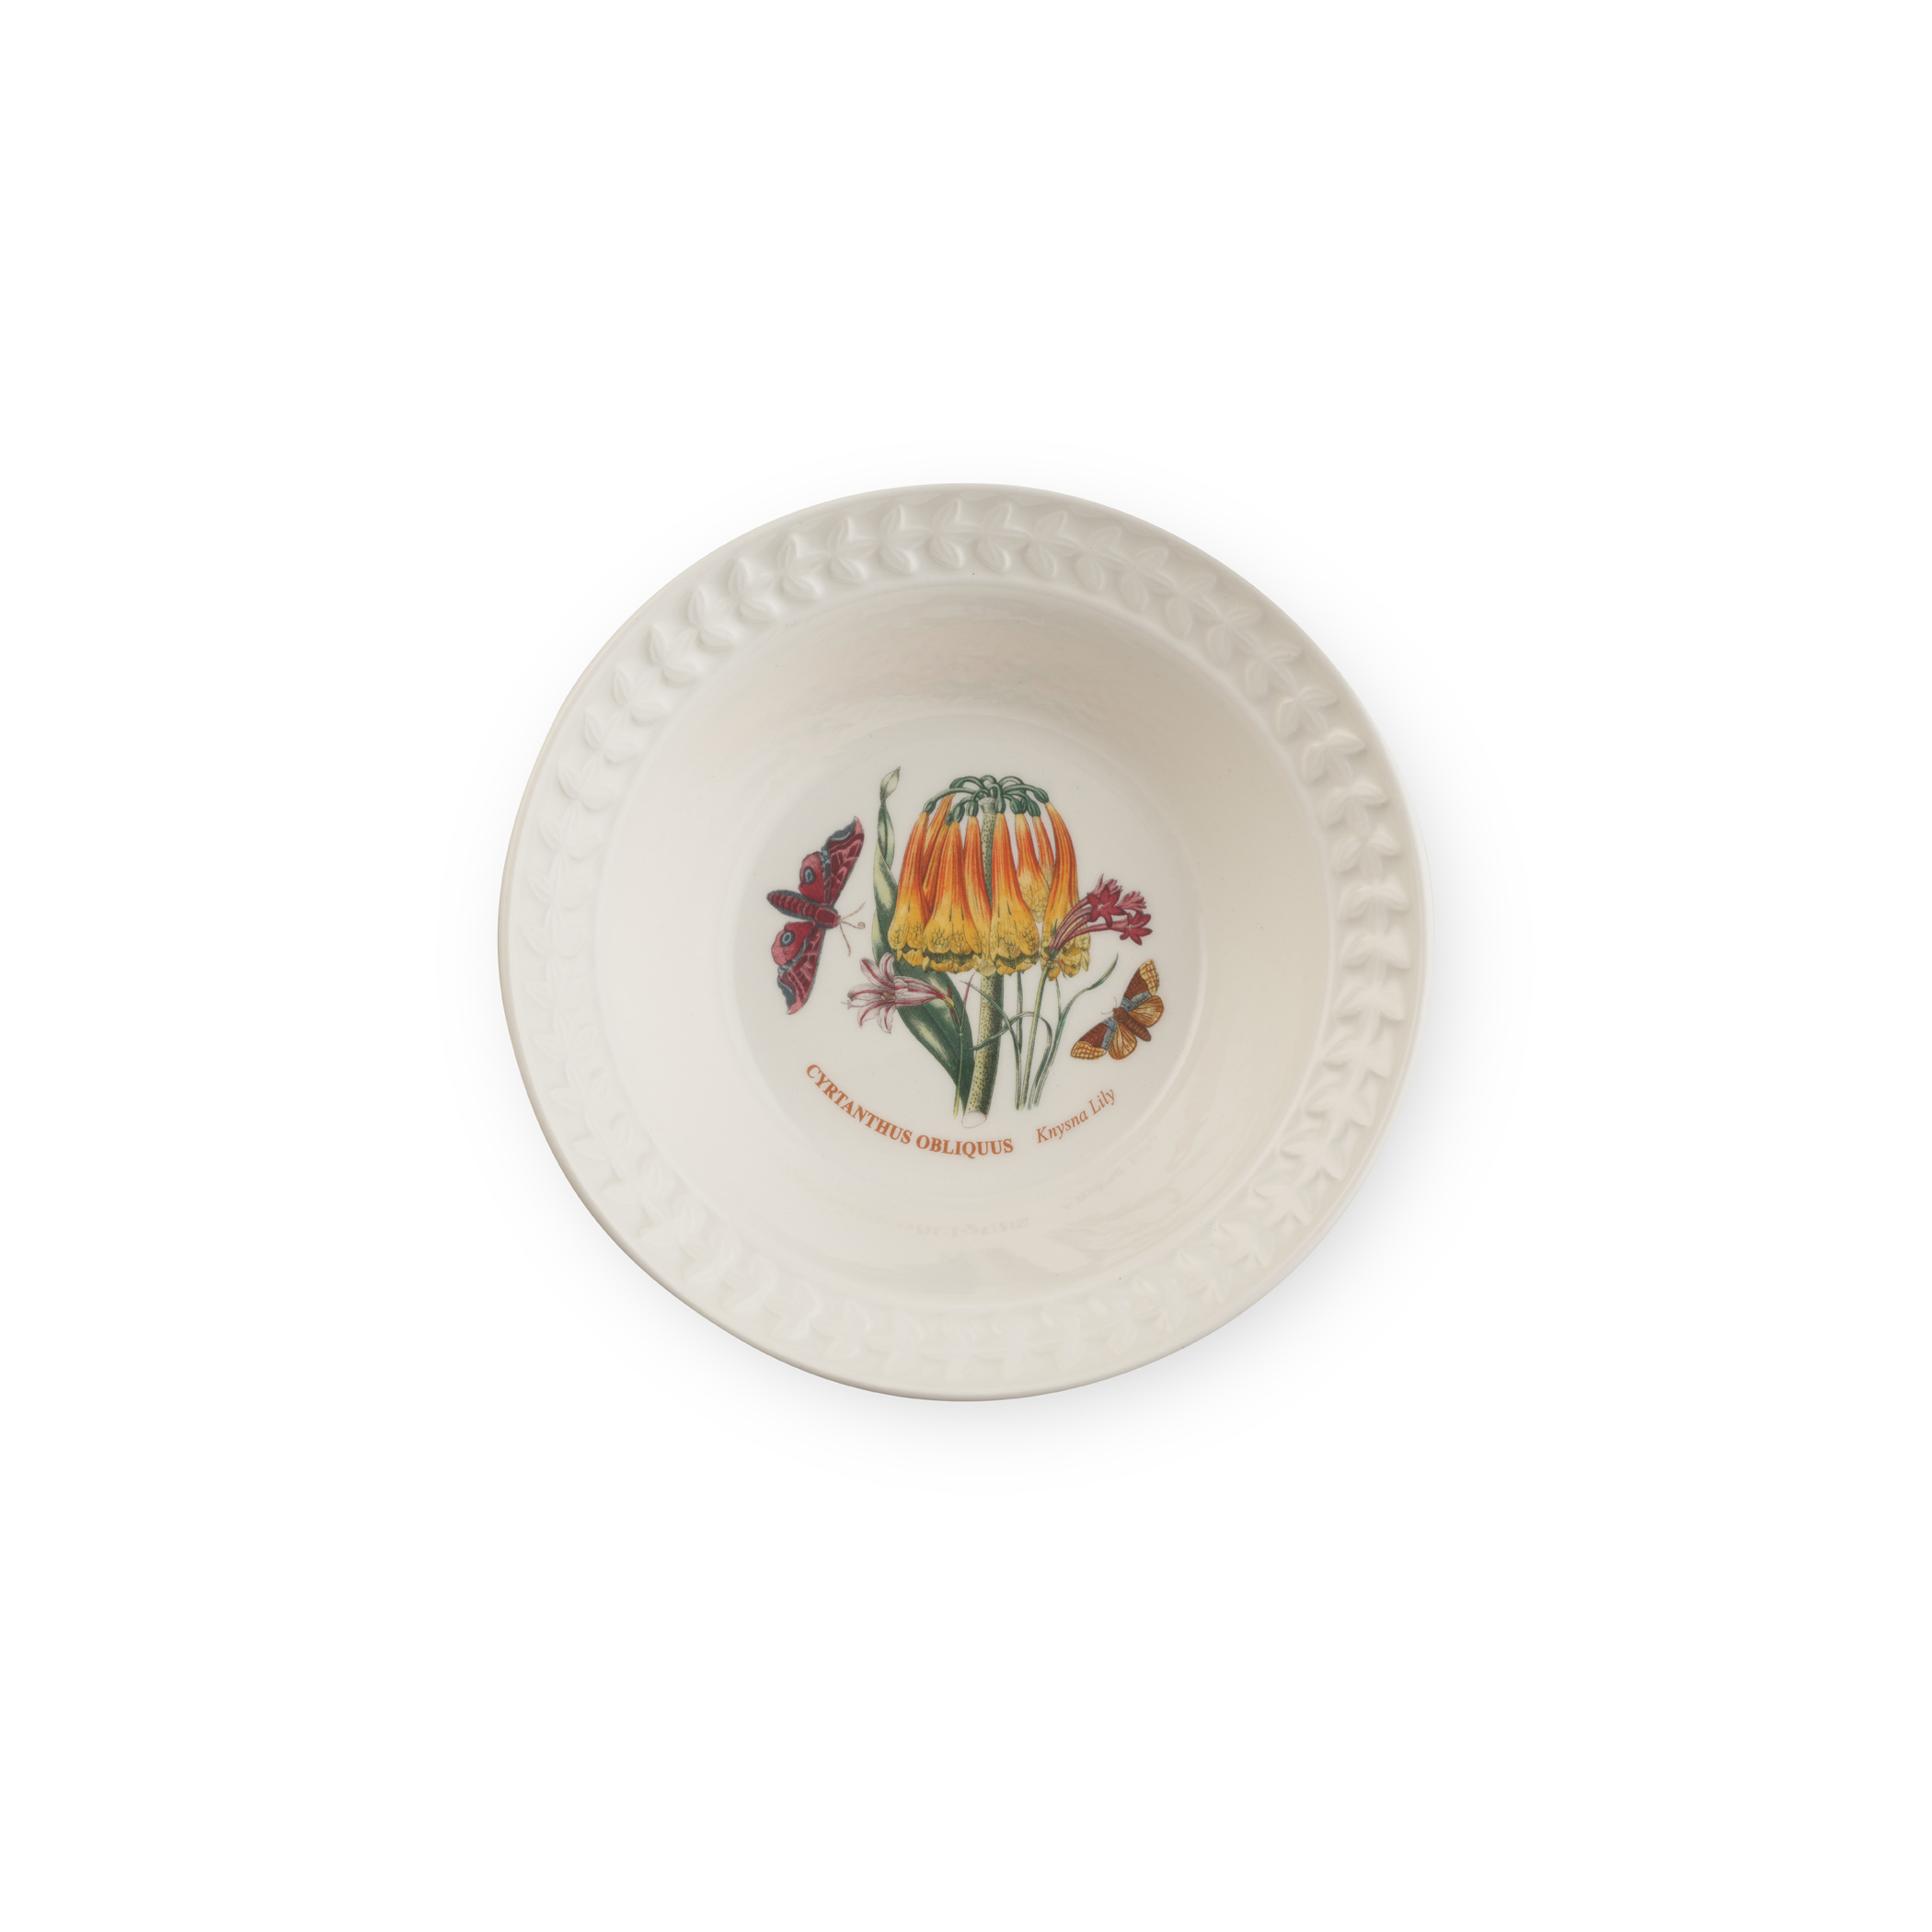 Botanic Garden Harmony Papilio Opal 6 Inch Cereal Bowl (Knysna Lily) image number null